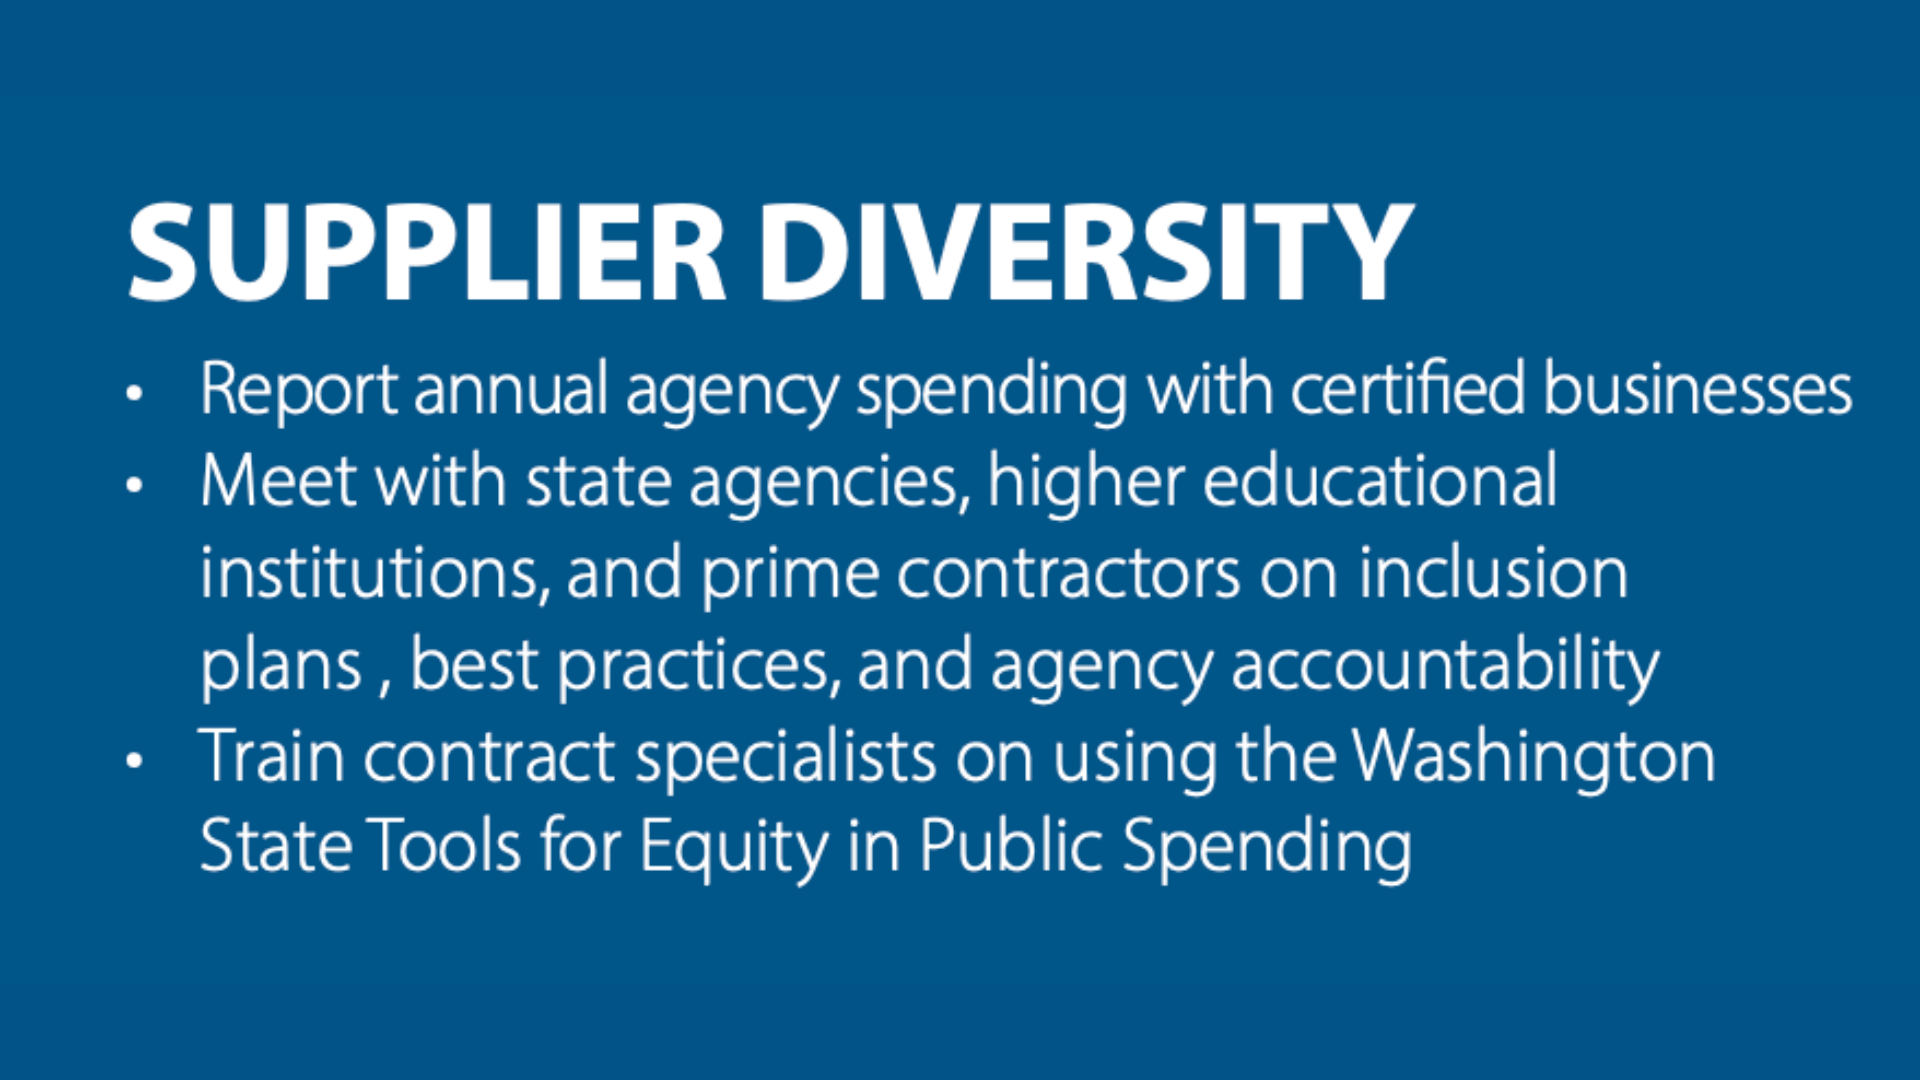 Graphic titled 'Supplier Diversity' outlining the efforts to report annual agency spending with certified businesses, meet with state agencies, higher education institutions, and prime contractors on inclusion plans, best practices, and agency accountability. It also mentions training contract specialists on using the Washington State Tools for Equity in Public Spending.